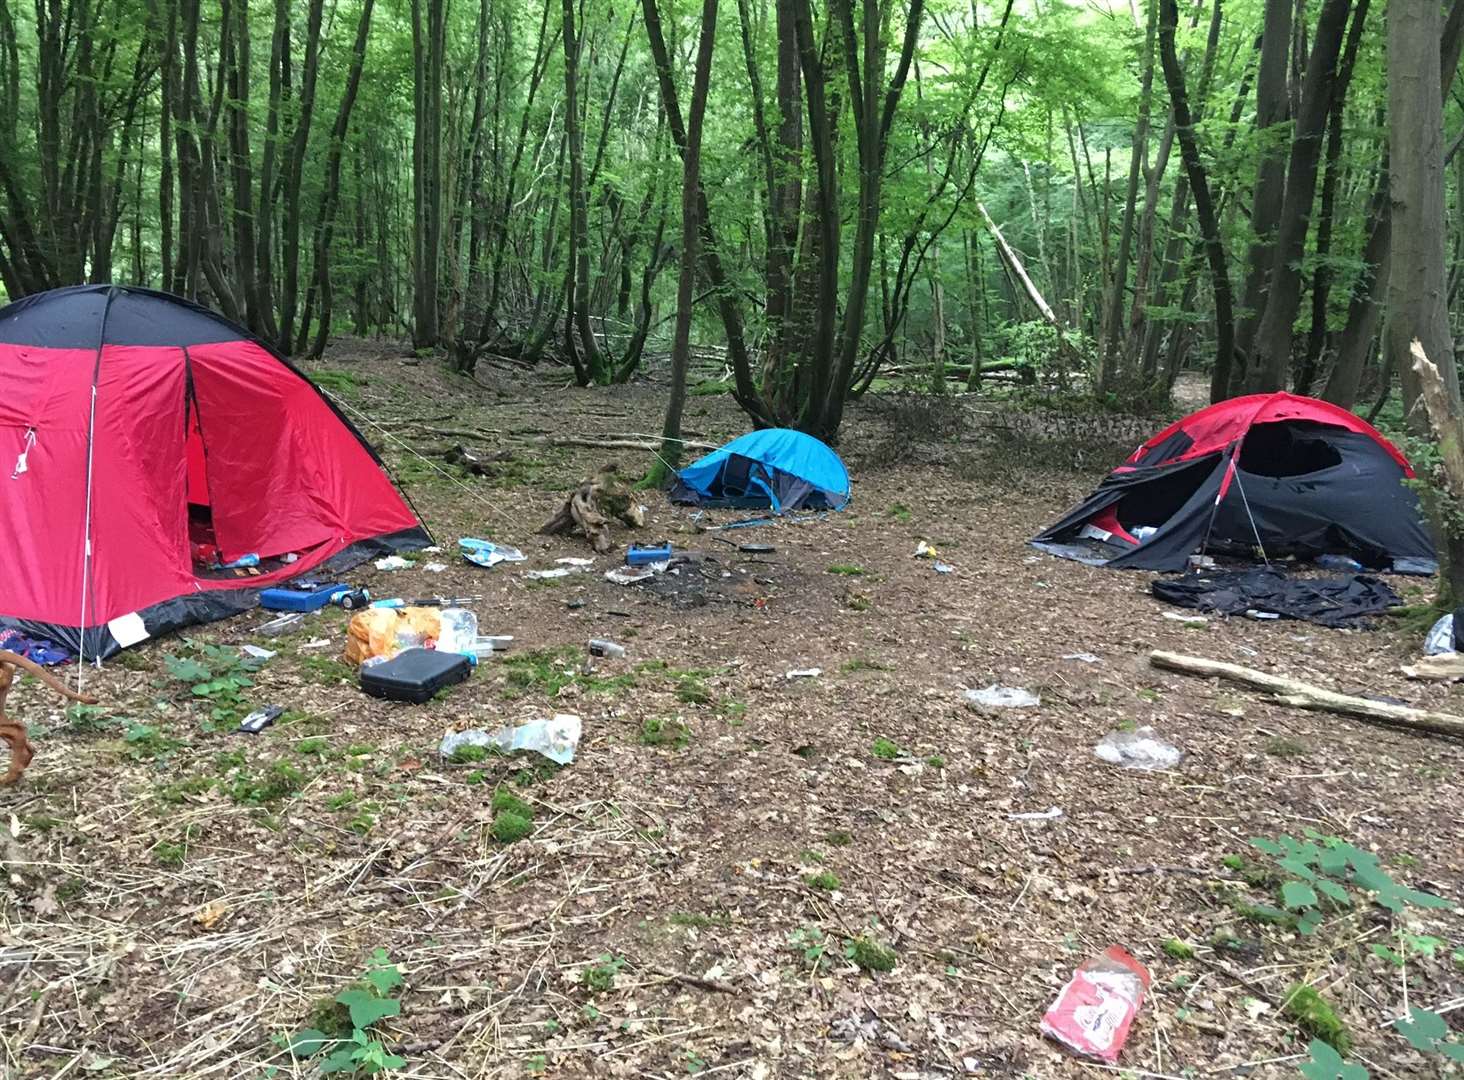 Wild campers have been leaving litter in woods at Pluckley near Ashford